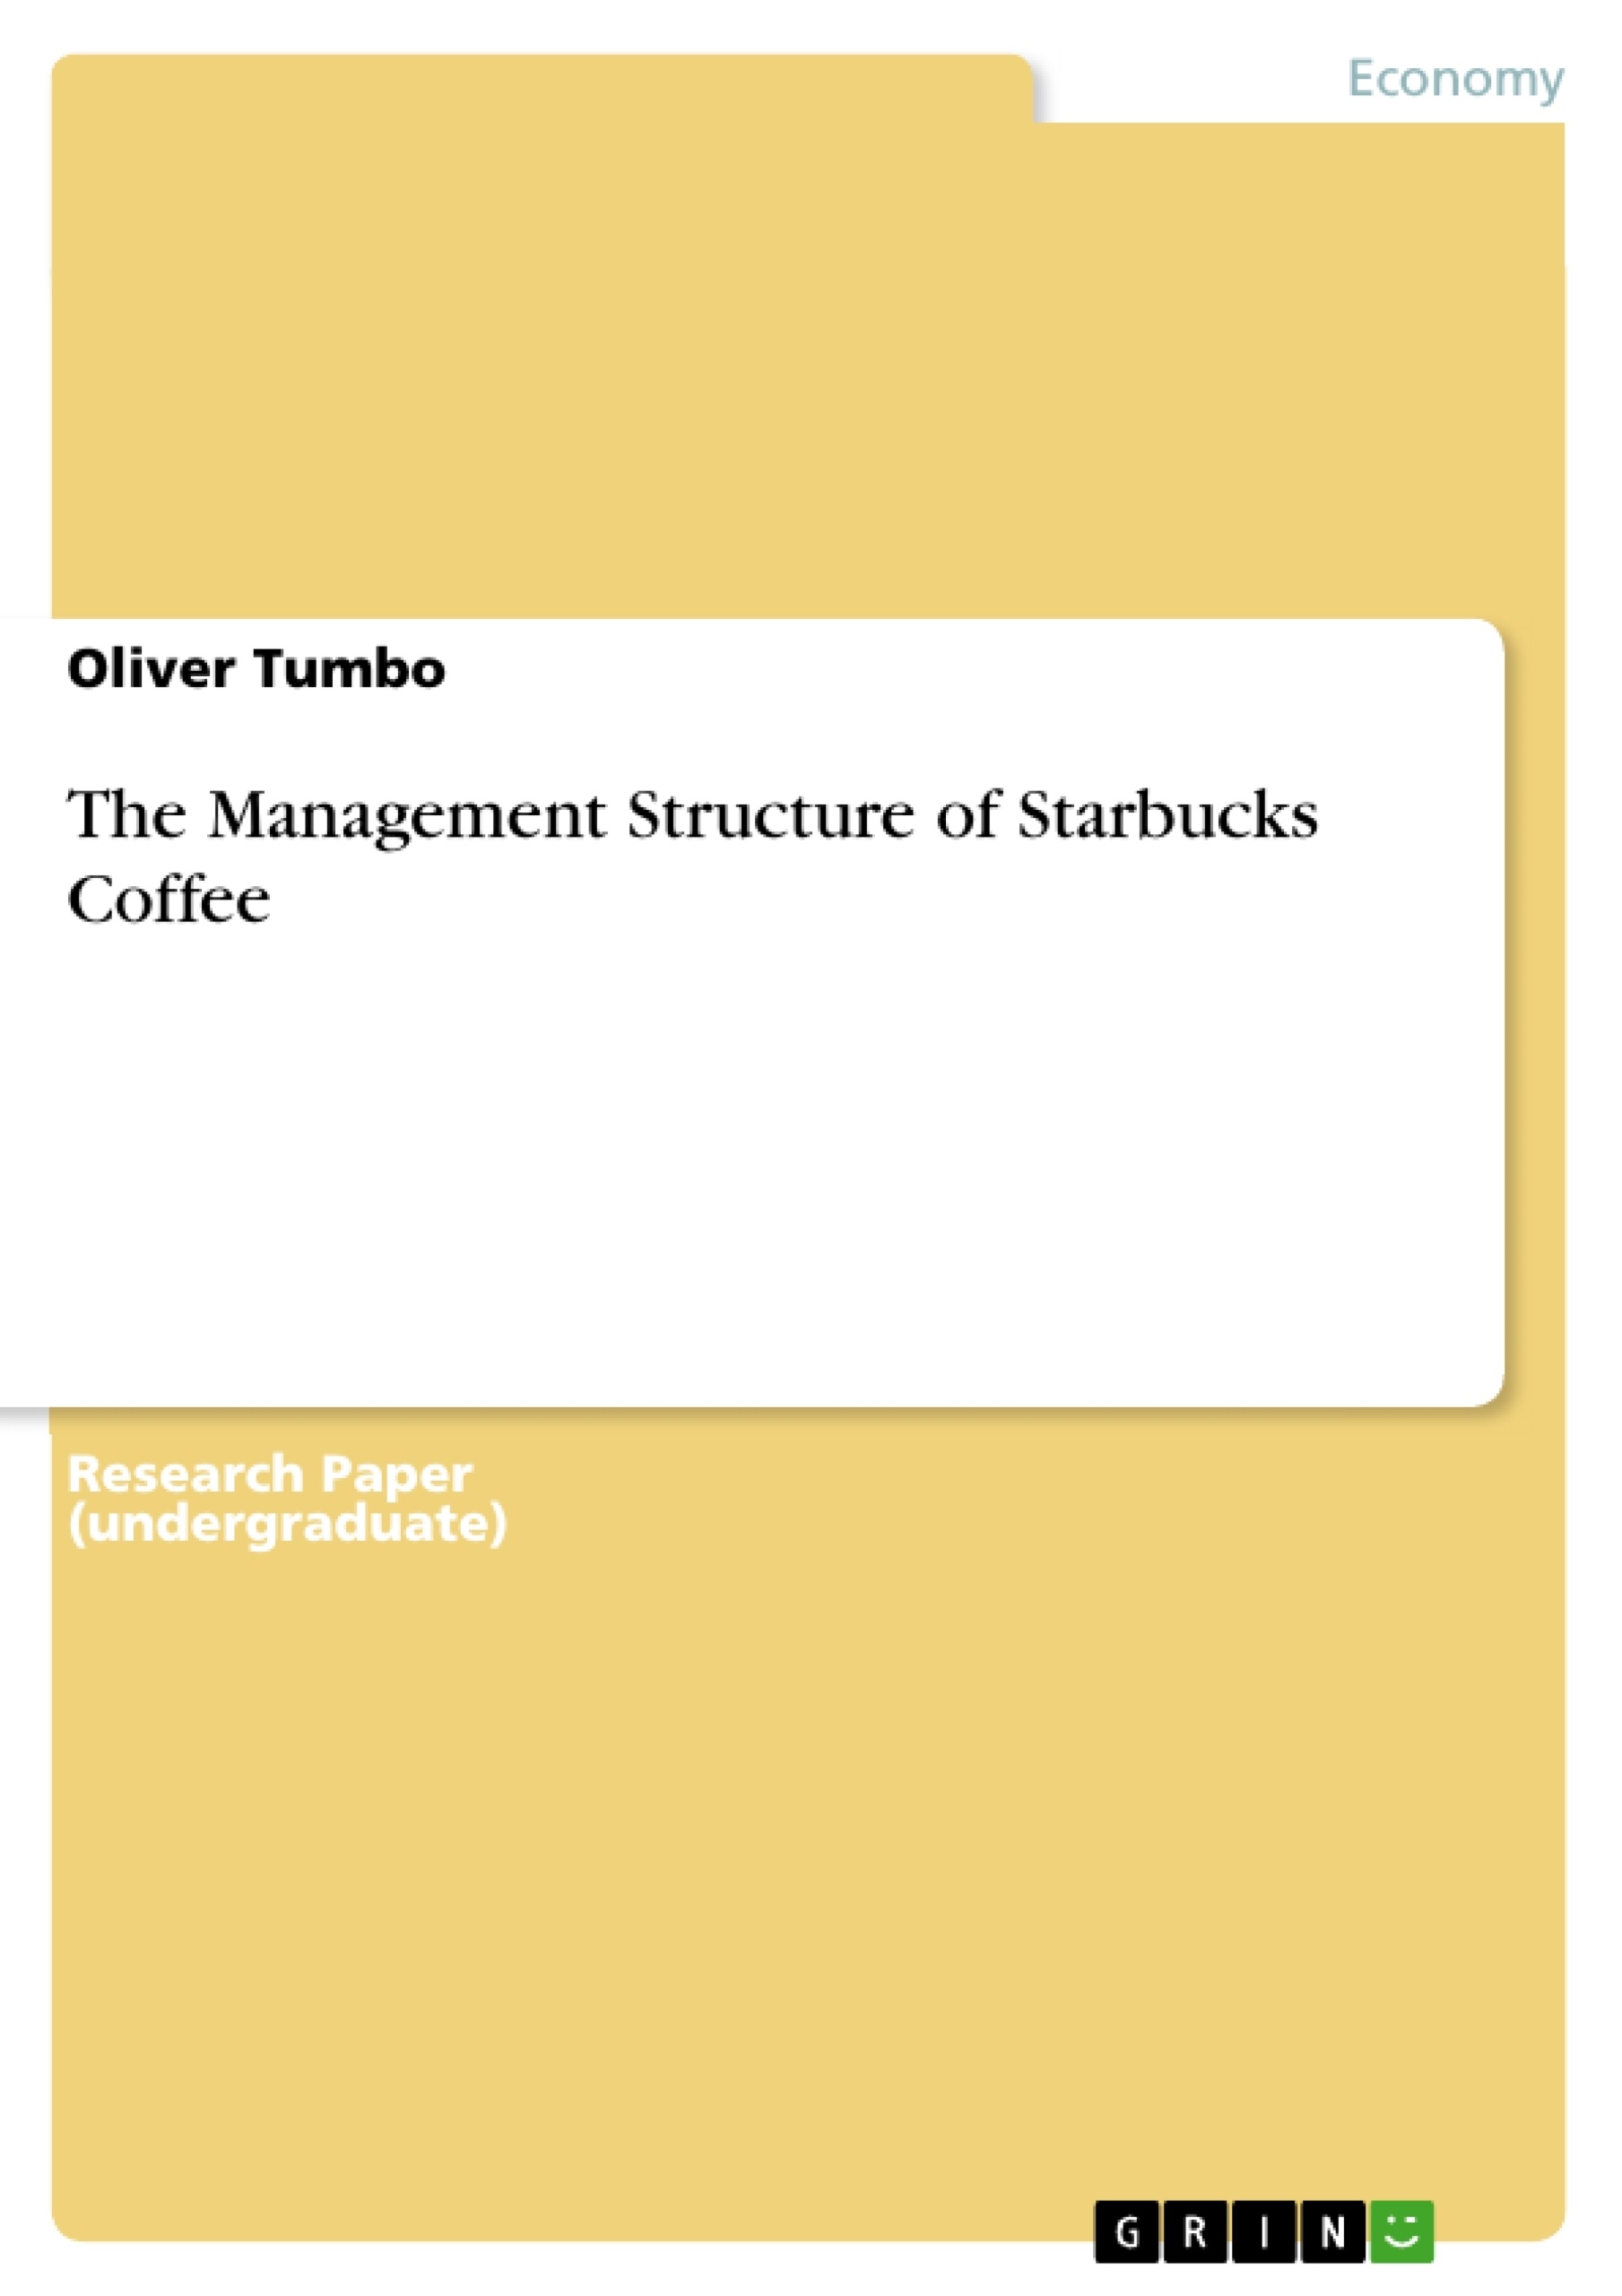 Title: The Management Structure of Starbucks Coffee